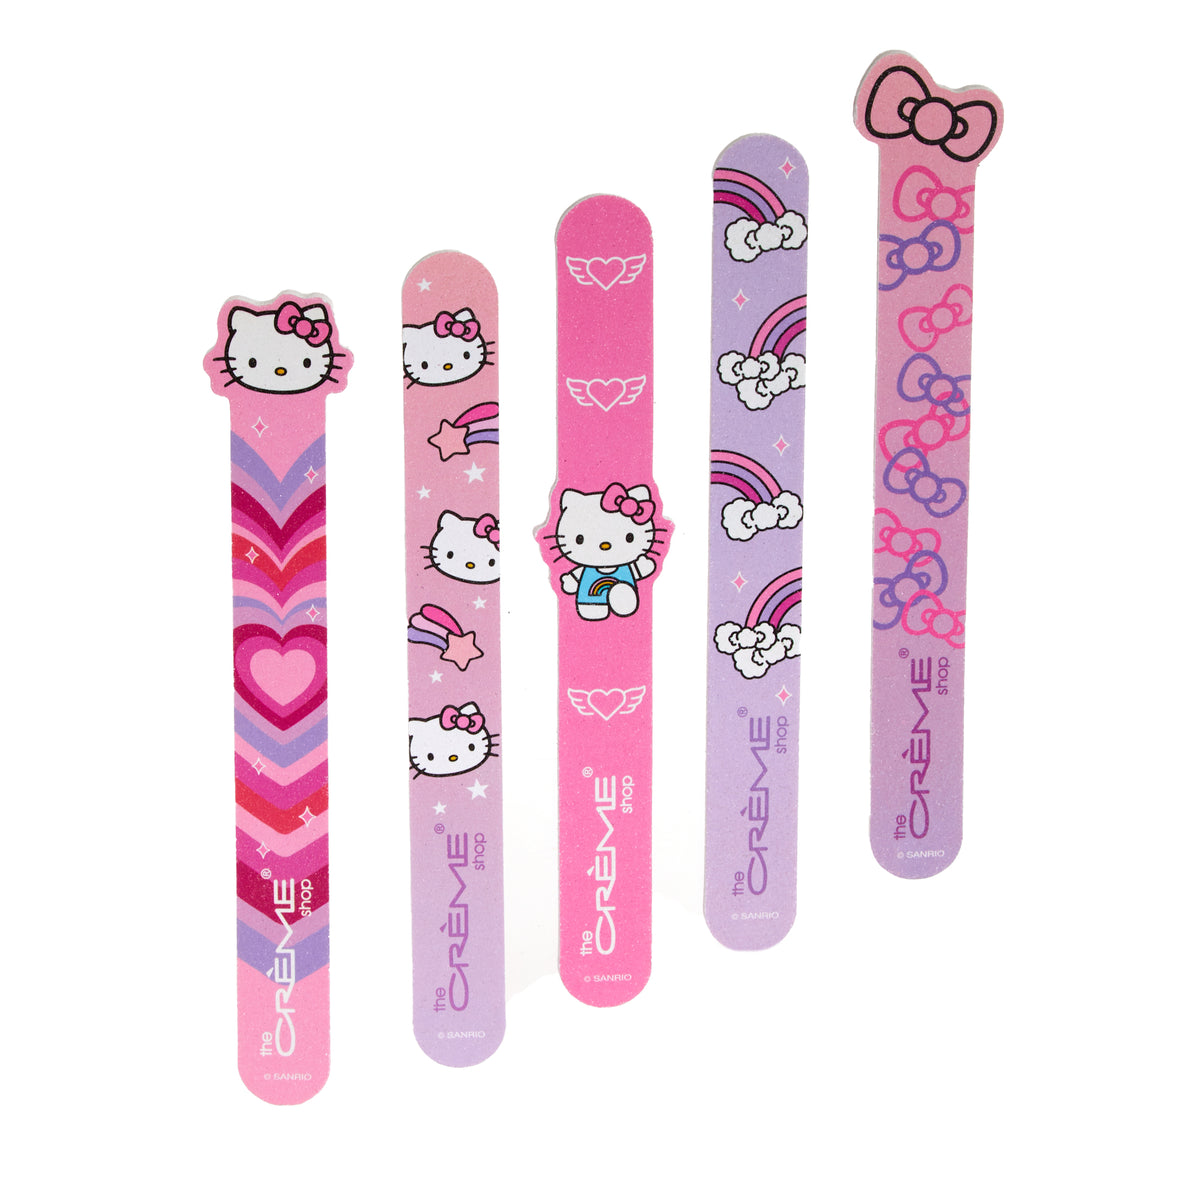 Hello Kitty Nail Stickers for sale